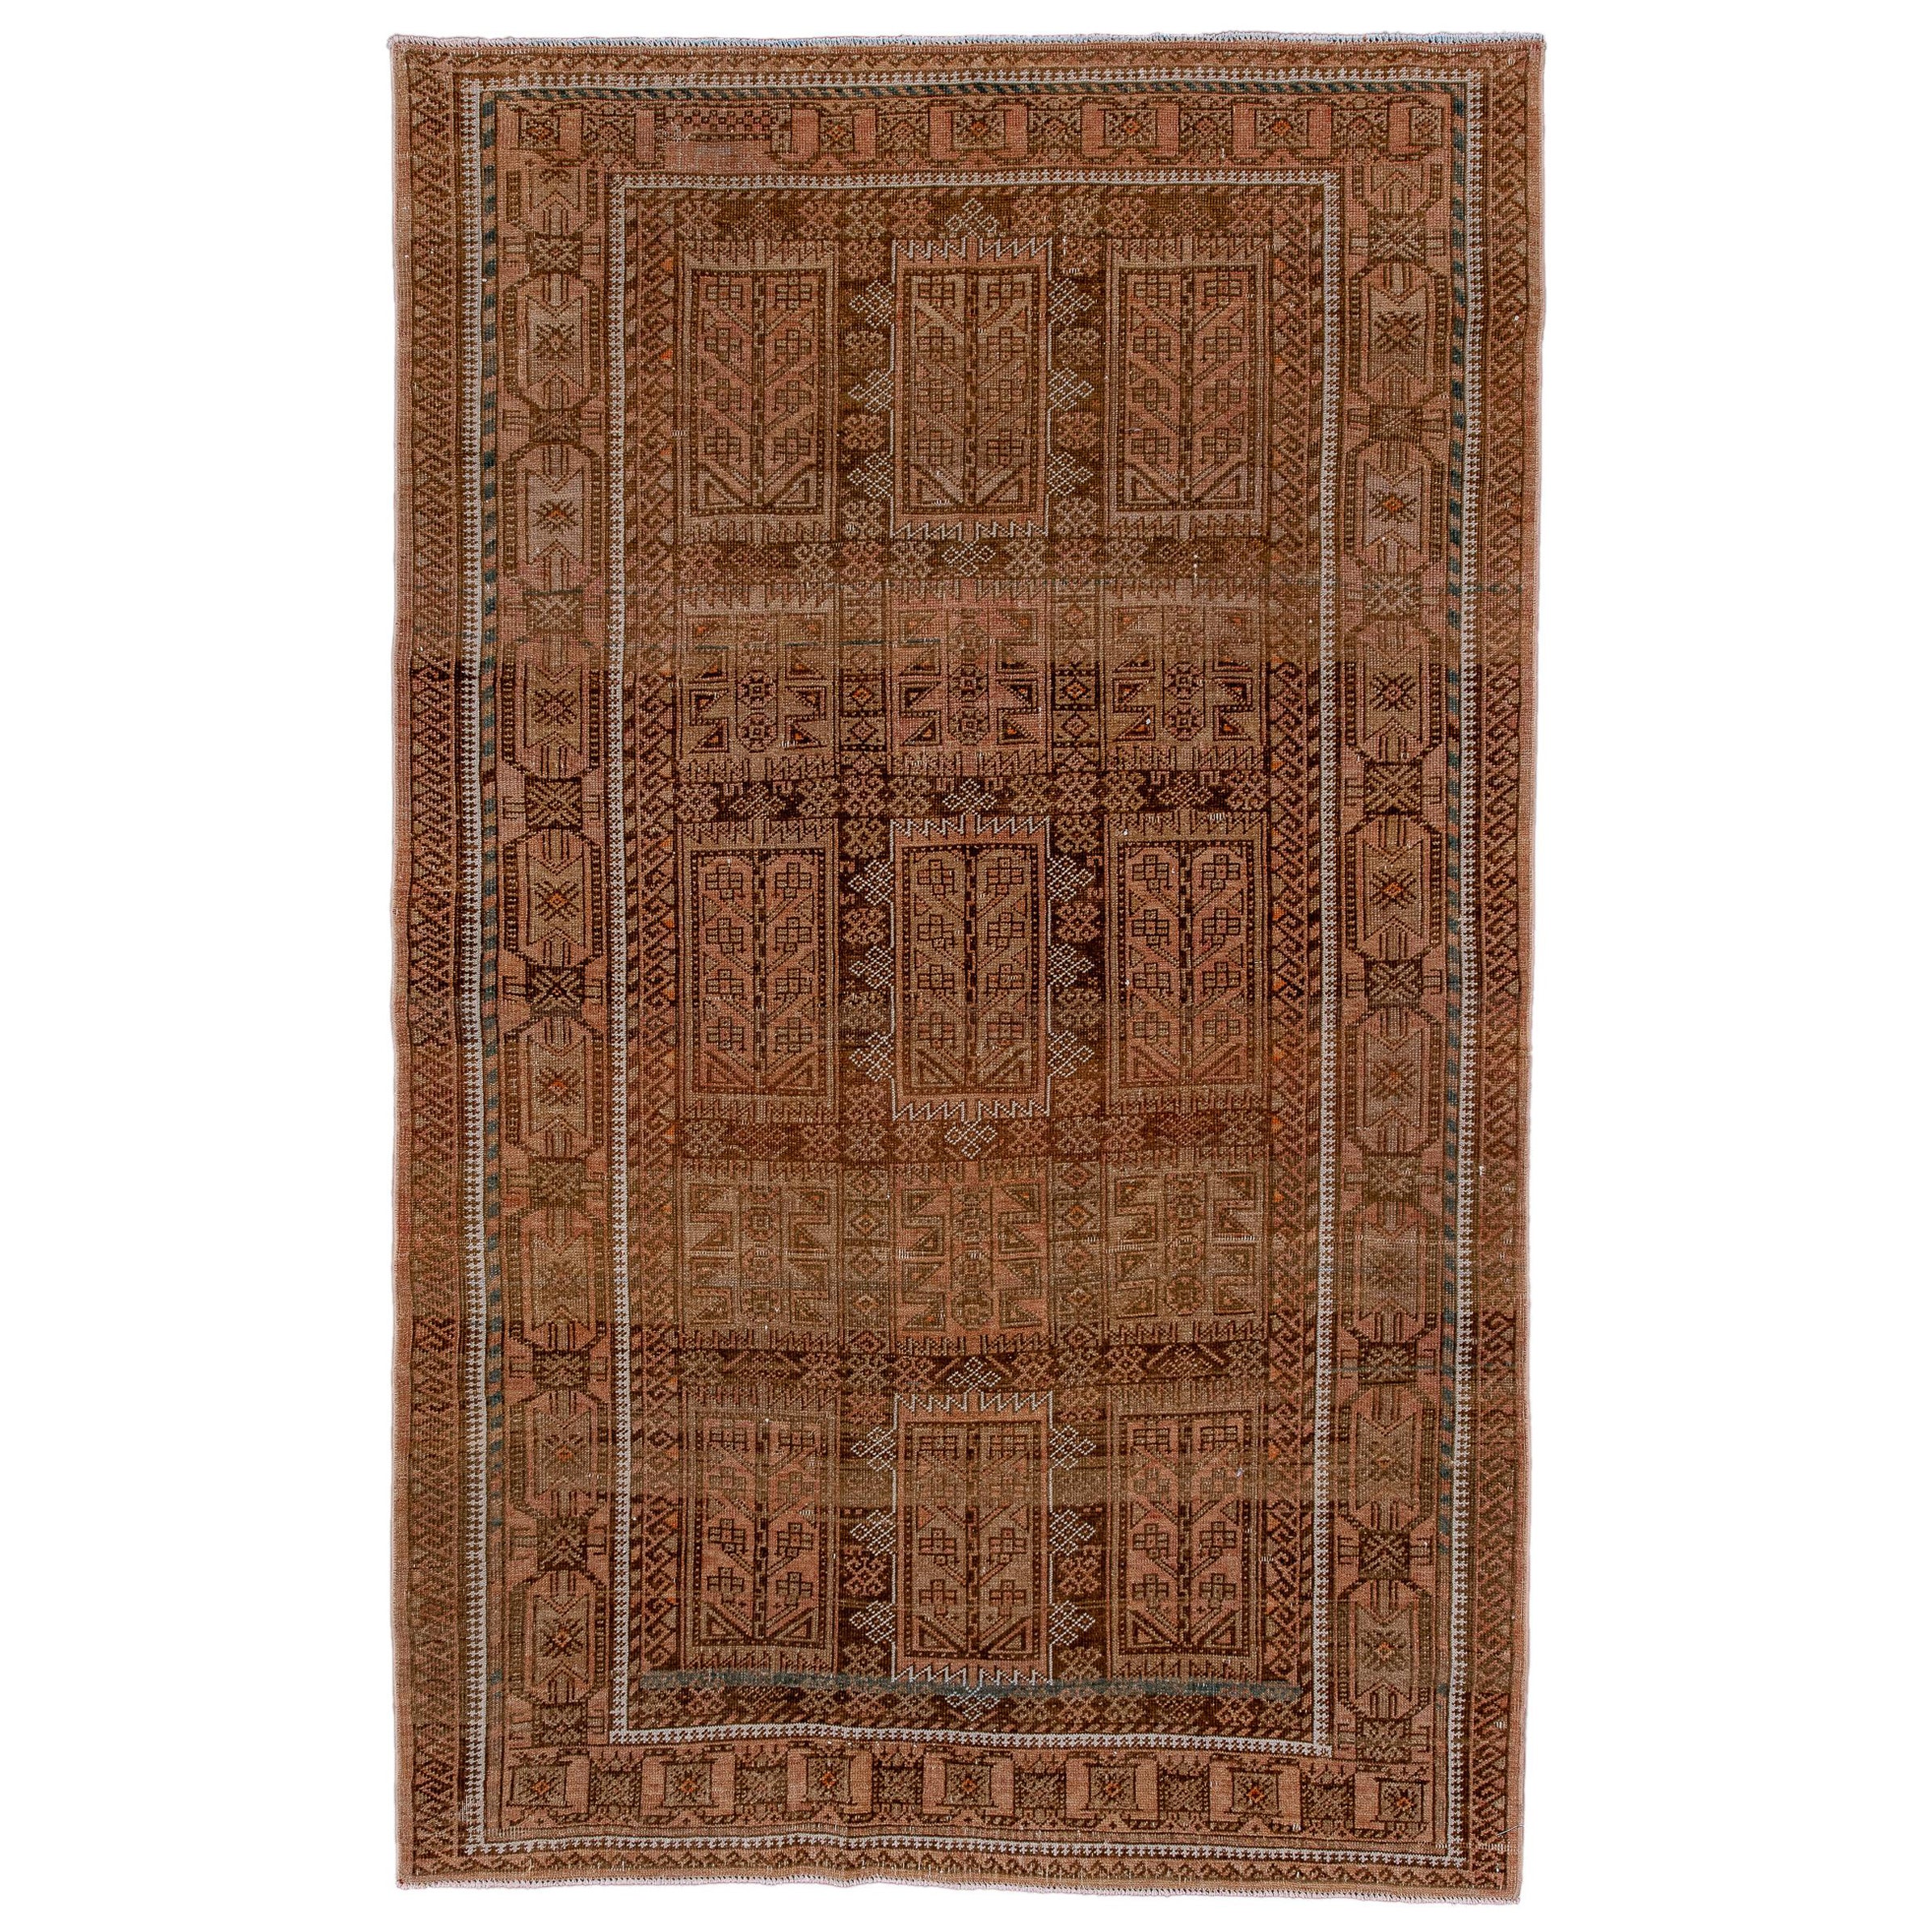 Antique Nomadic Belouch Rug with Coral Brown Colors